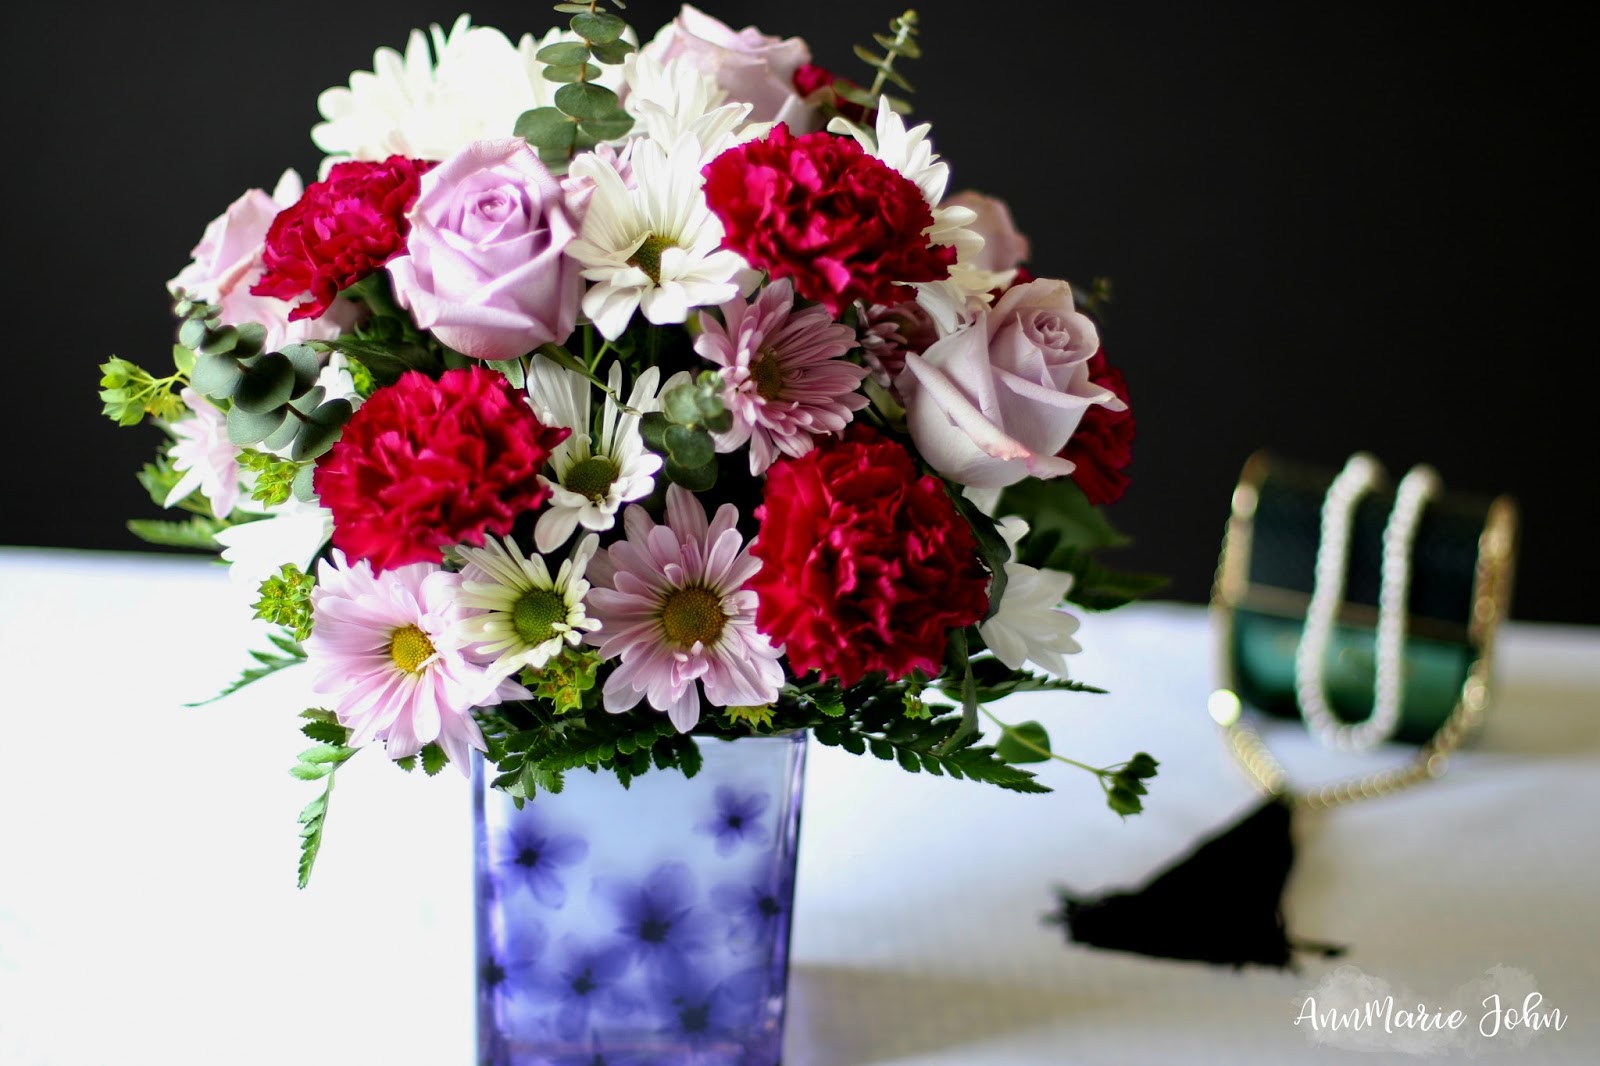 4 Easy Ways You Can Honor Mom This Mother’s Day – #ImJustLikeHer